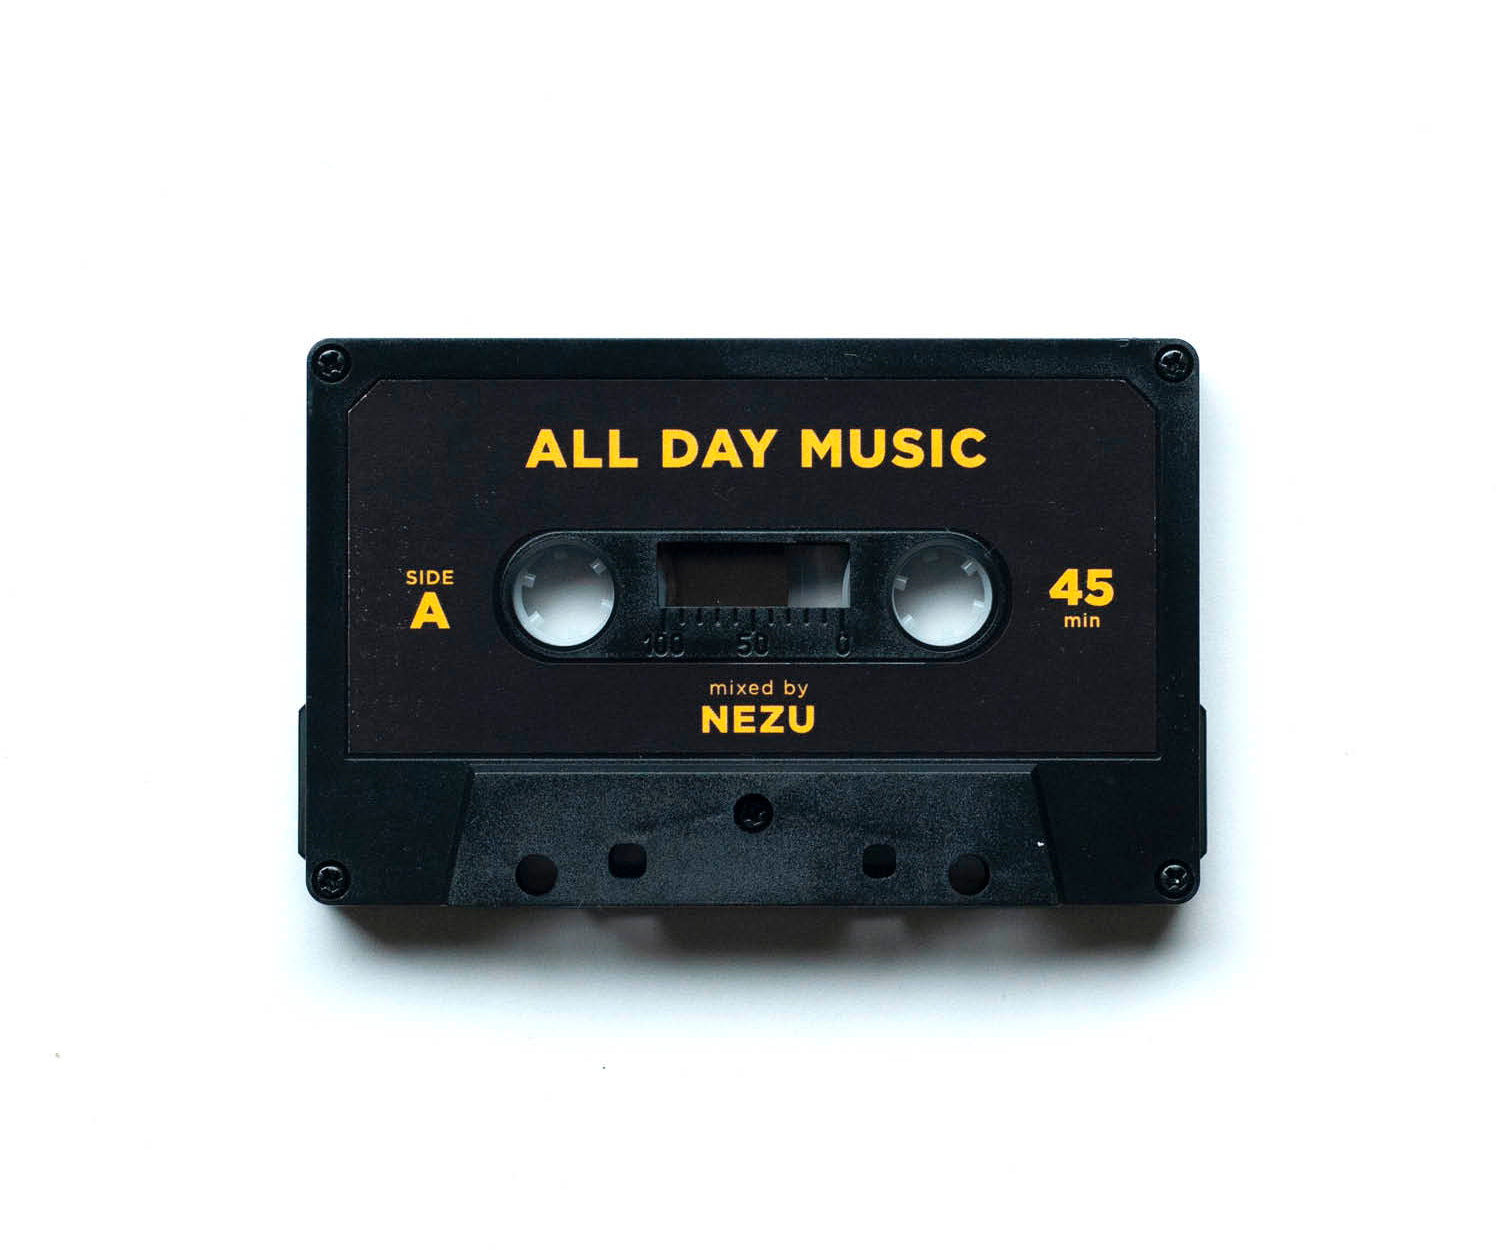 A.D.M. #9 - Mixed by NEZU | LIKE THIS SHOP